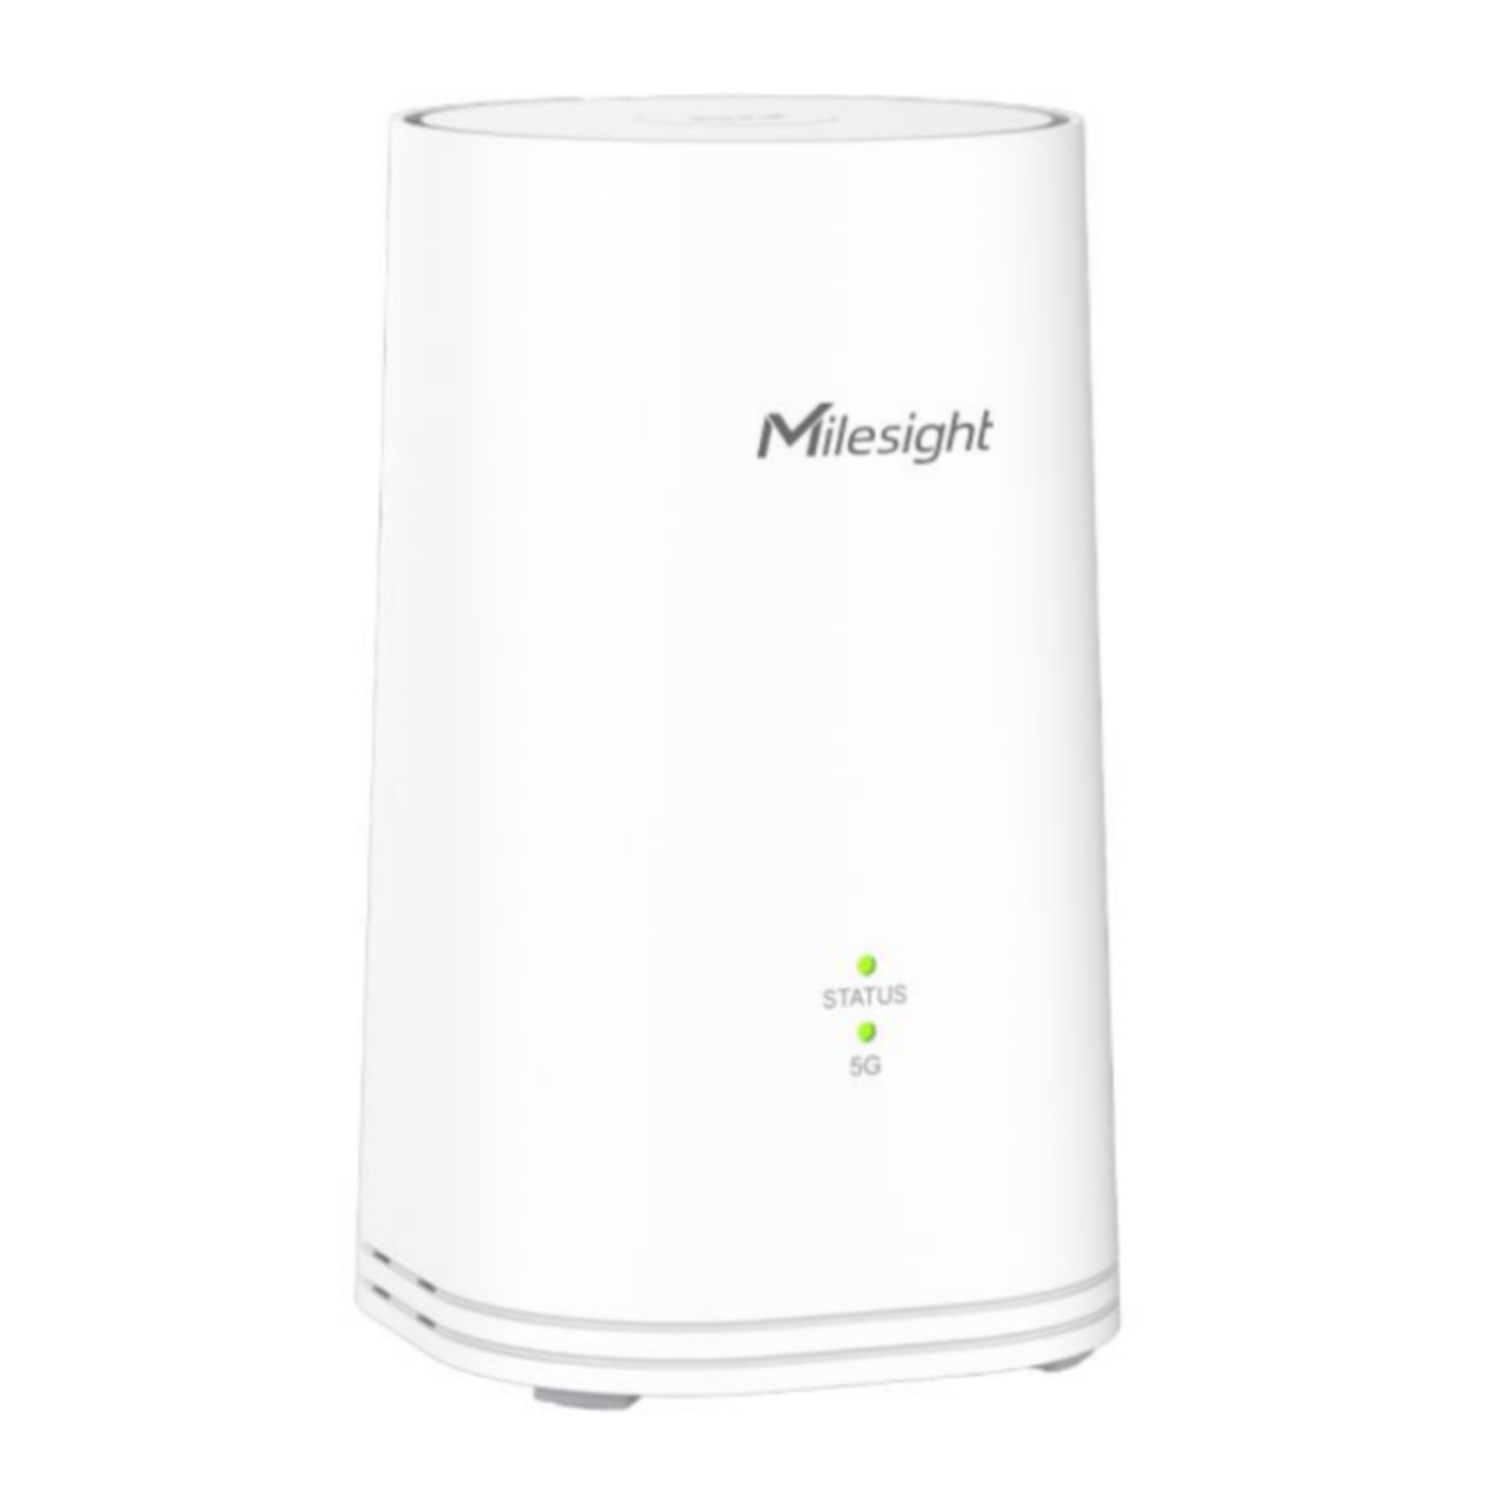 Milesight UF51 5G CPE Outdoor, 4G/5G Routers